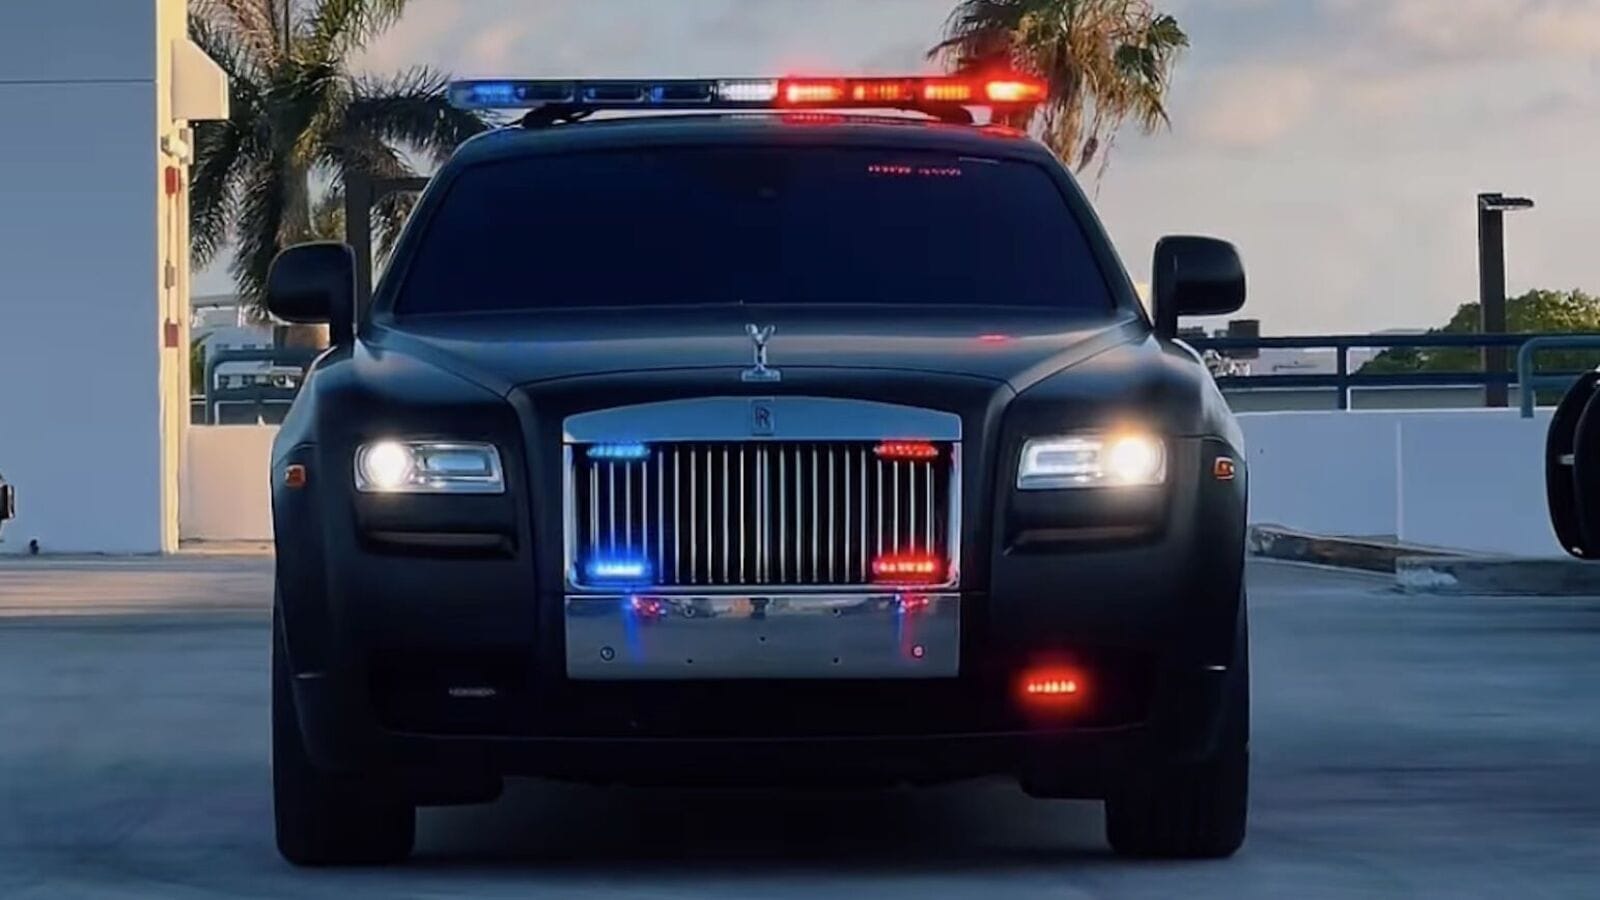 Miami police adds Rolls-Royce Ghost to fleet, claims to be ‘worlds first’